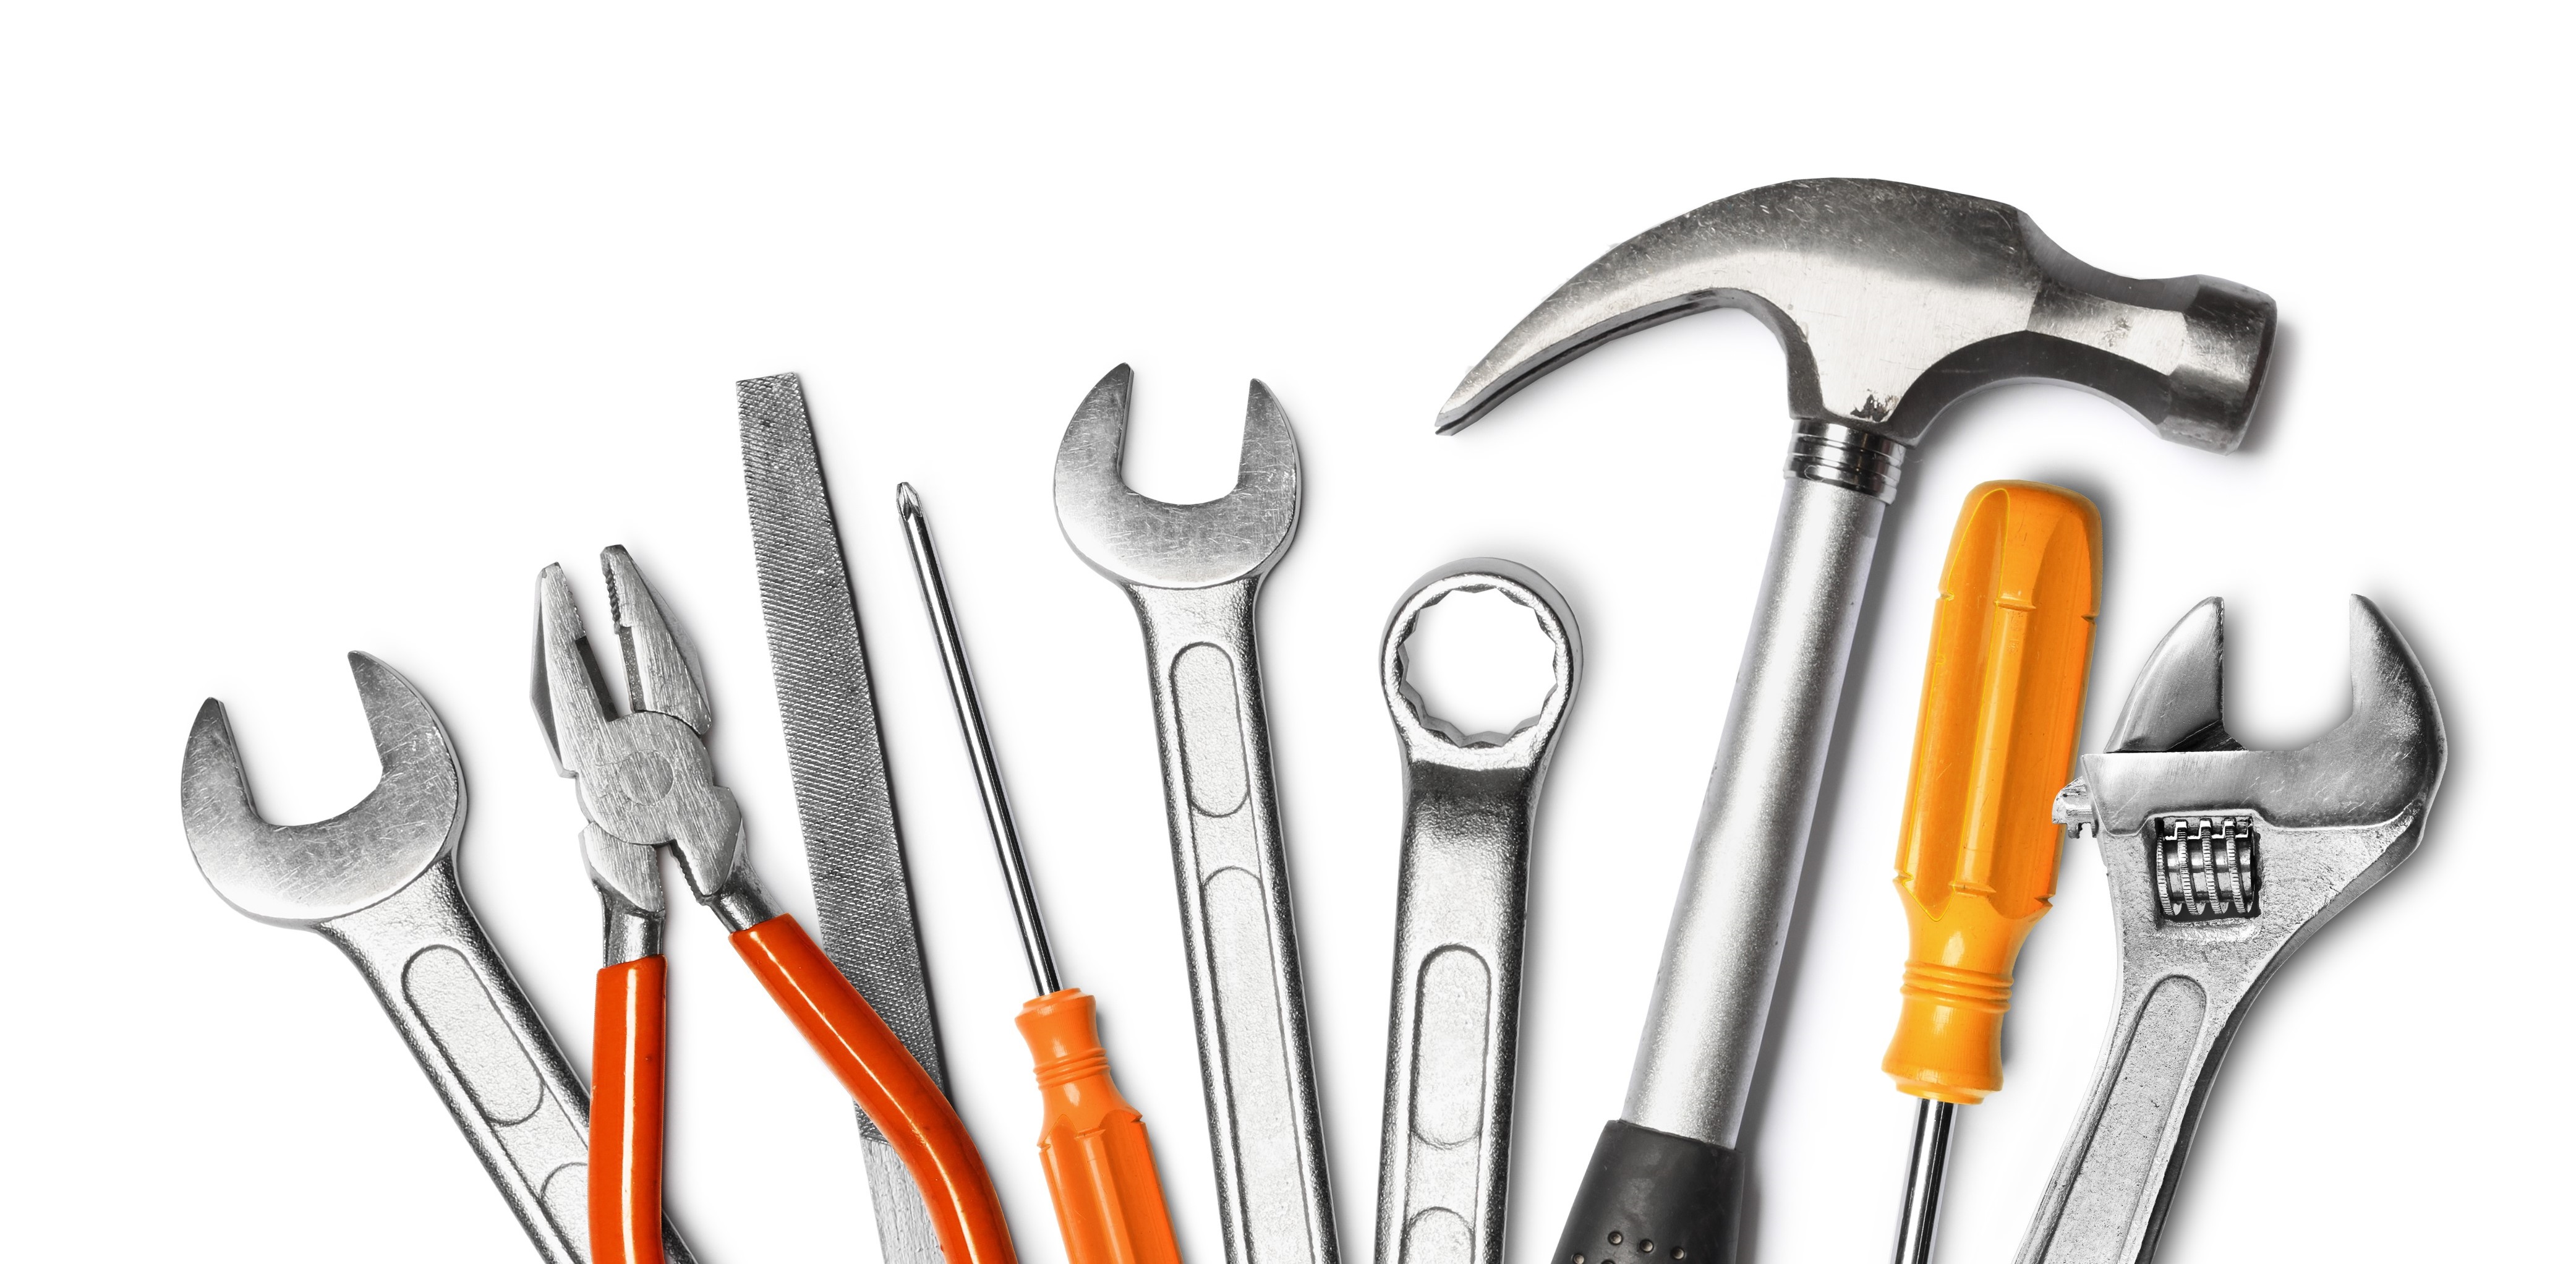 Find top notch tools , here at Super Tech Supplies ...